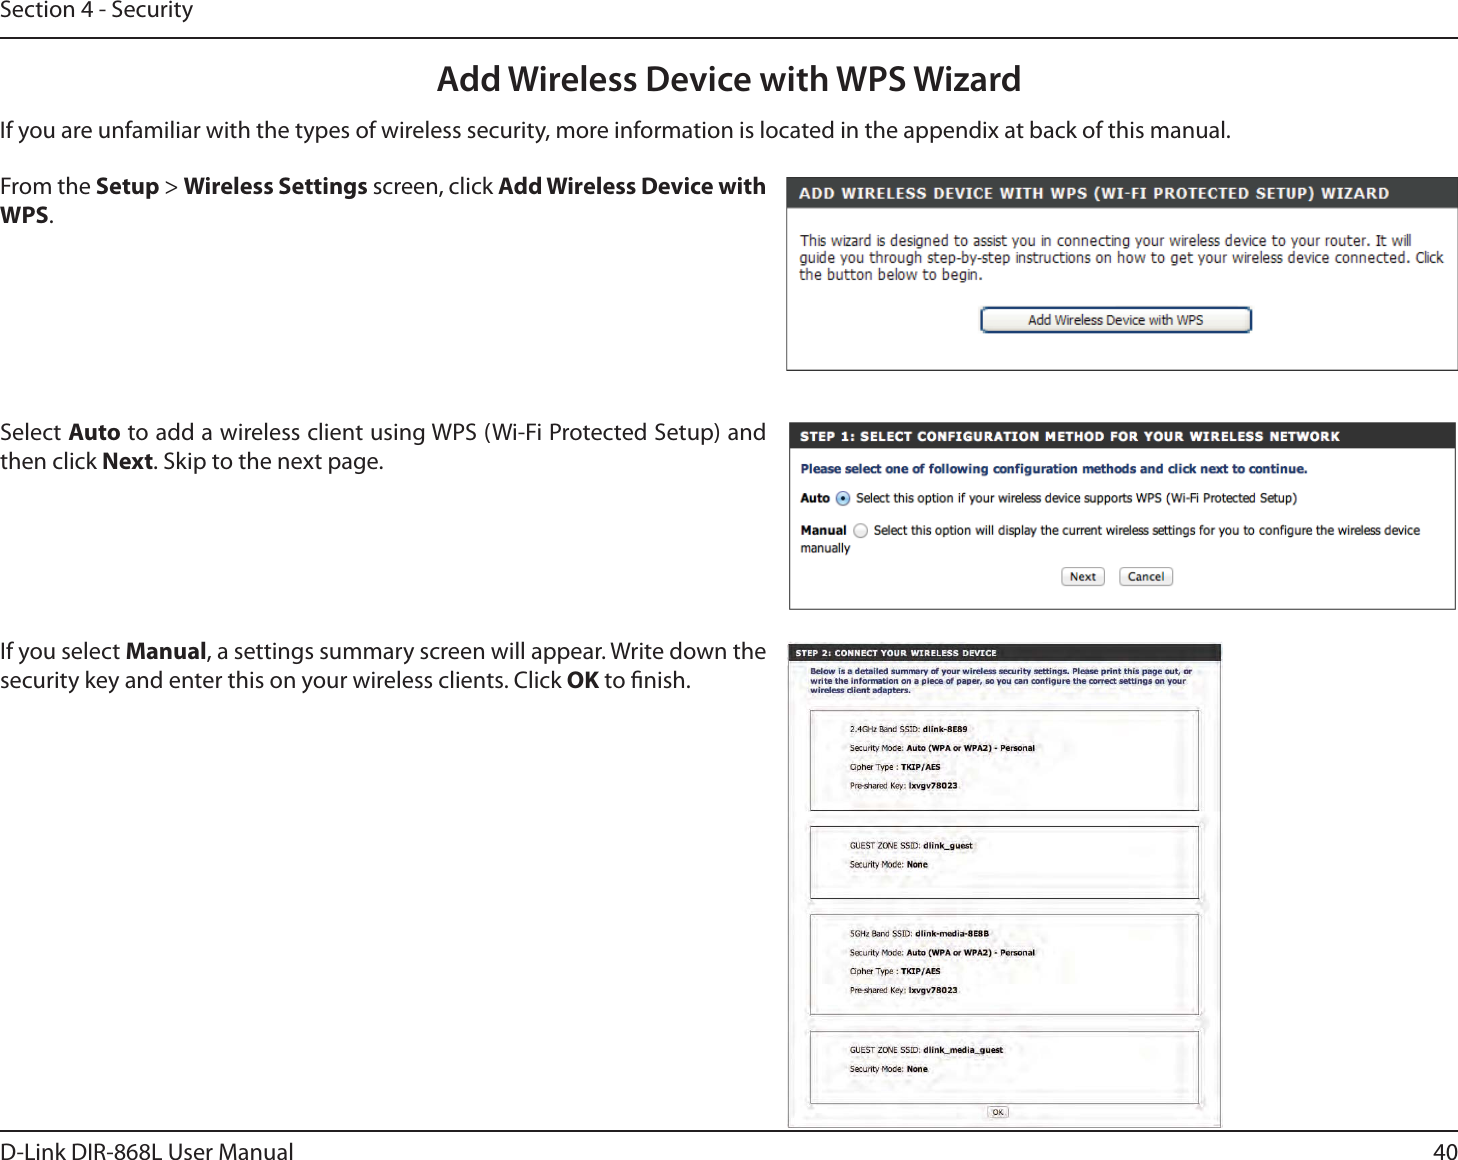 40D-Link DIR-868L User ManualSection 4 - SecurityFrom the Setup &gt; Wireless Settings screen, click Add Wireless Device with WPS.Add Wireless Device with WPS WizardIf you select Manual, a settings summary screen will appear. Write down the security key and enter this on your wireless clients. Click OK to nish.Select Auto to add a wireless client using WPS (Wi-Fi Protected Setup) and then click Next. Skip to the next page. If you are unfamiliar with the types of wireless security, more information is located in the appendix at back of this manual.